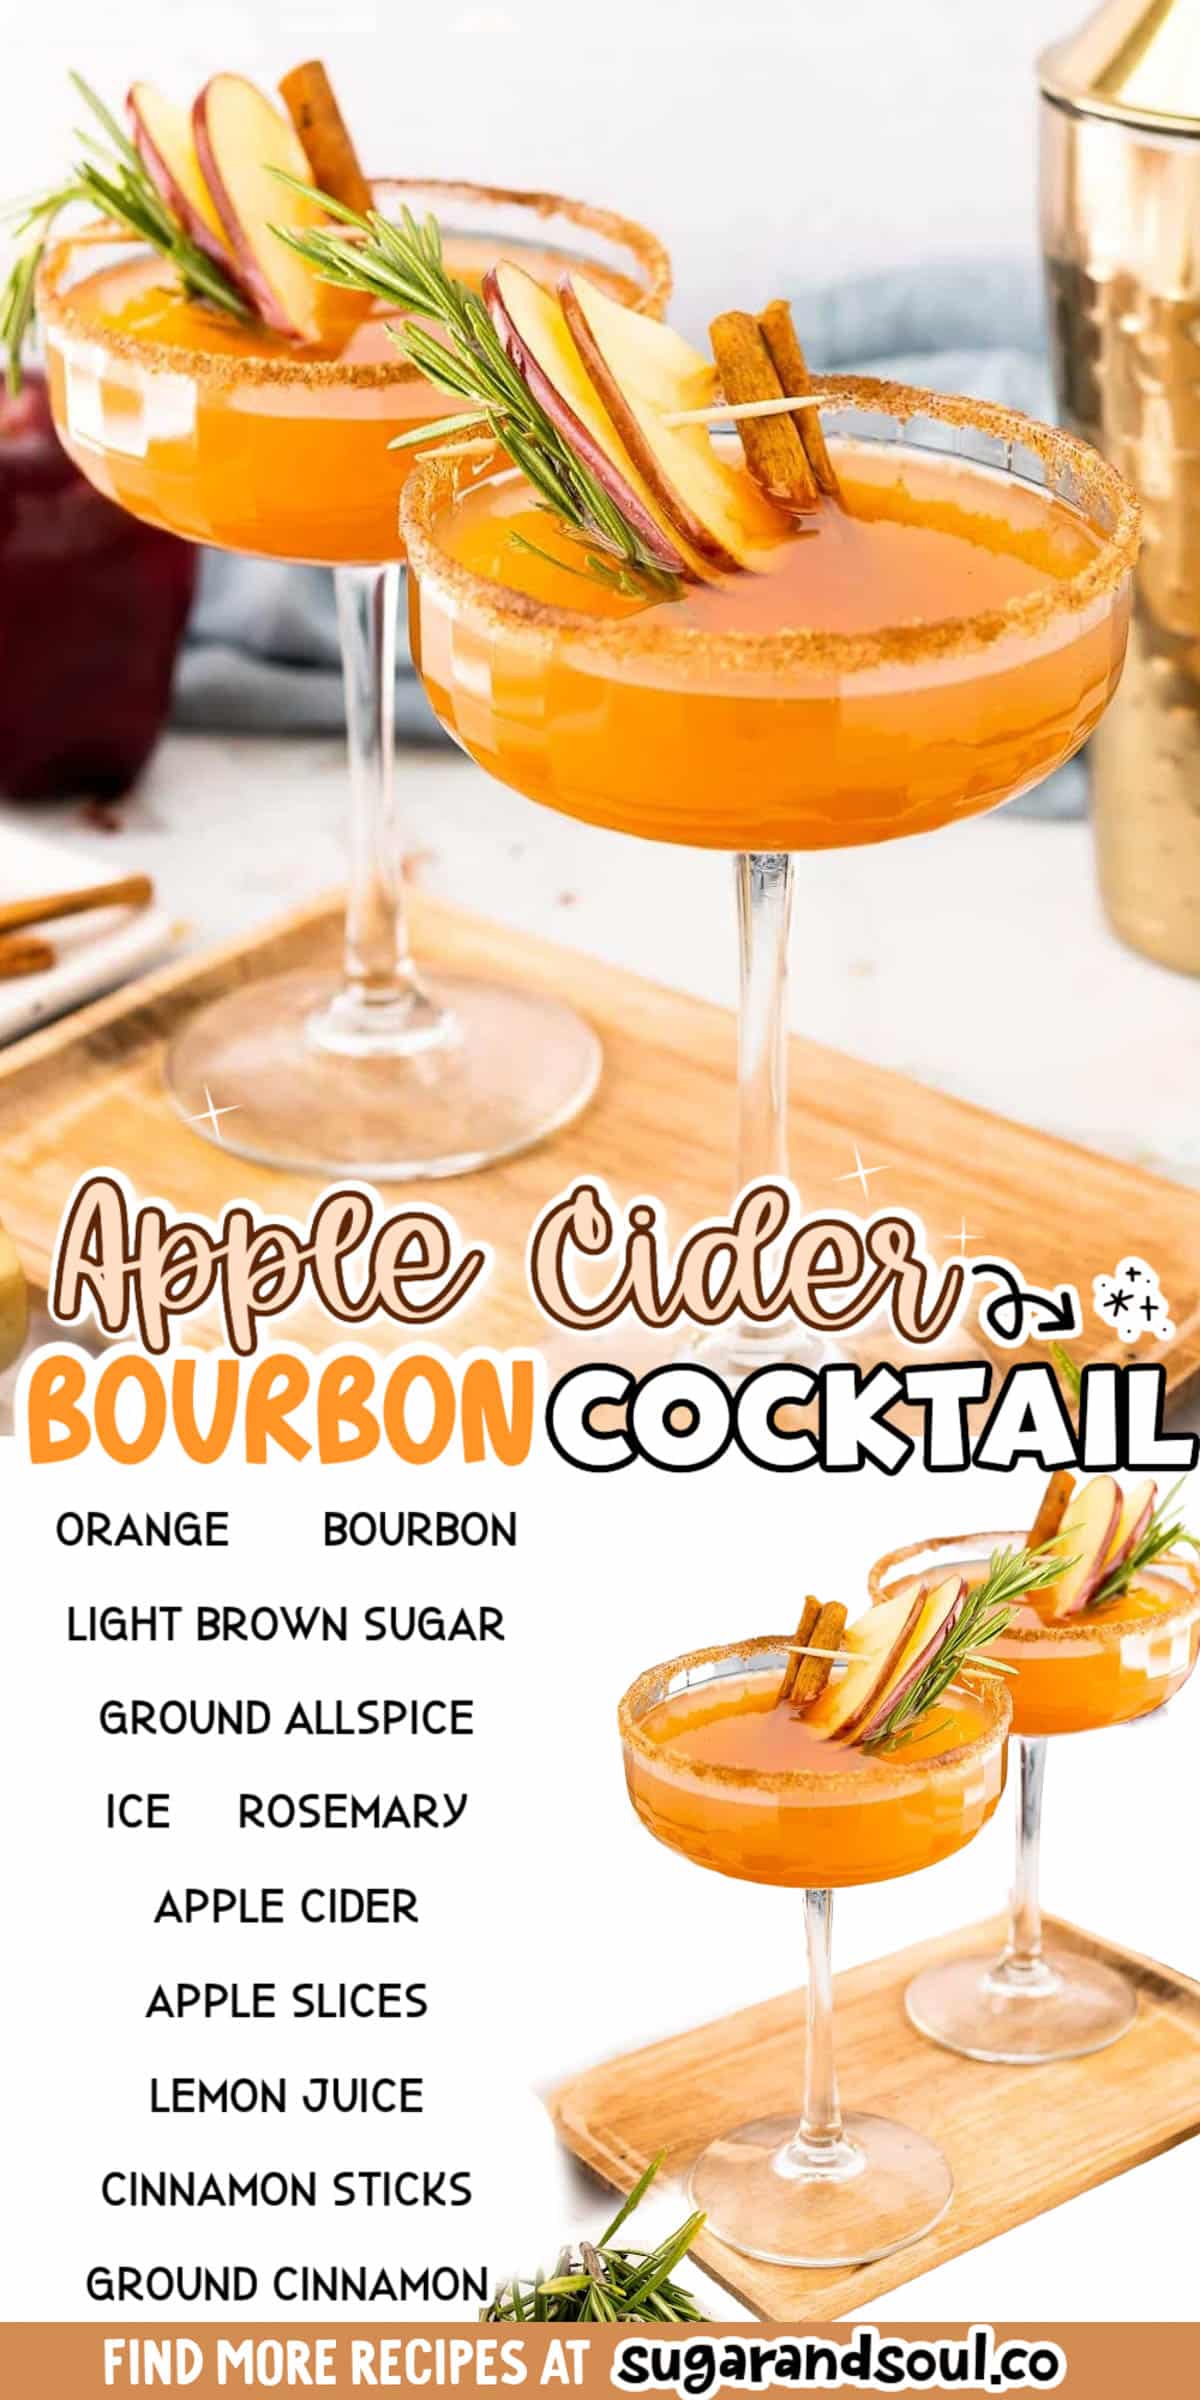 Apple Cider Bourbon Cocktail is the perfect Fall sipper that's overflowing with the delicious cozy flavors of fall! An easy-to-make small batch cocktail recipe that whips up 3 drinks! via @sugarandsoulco